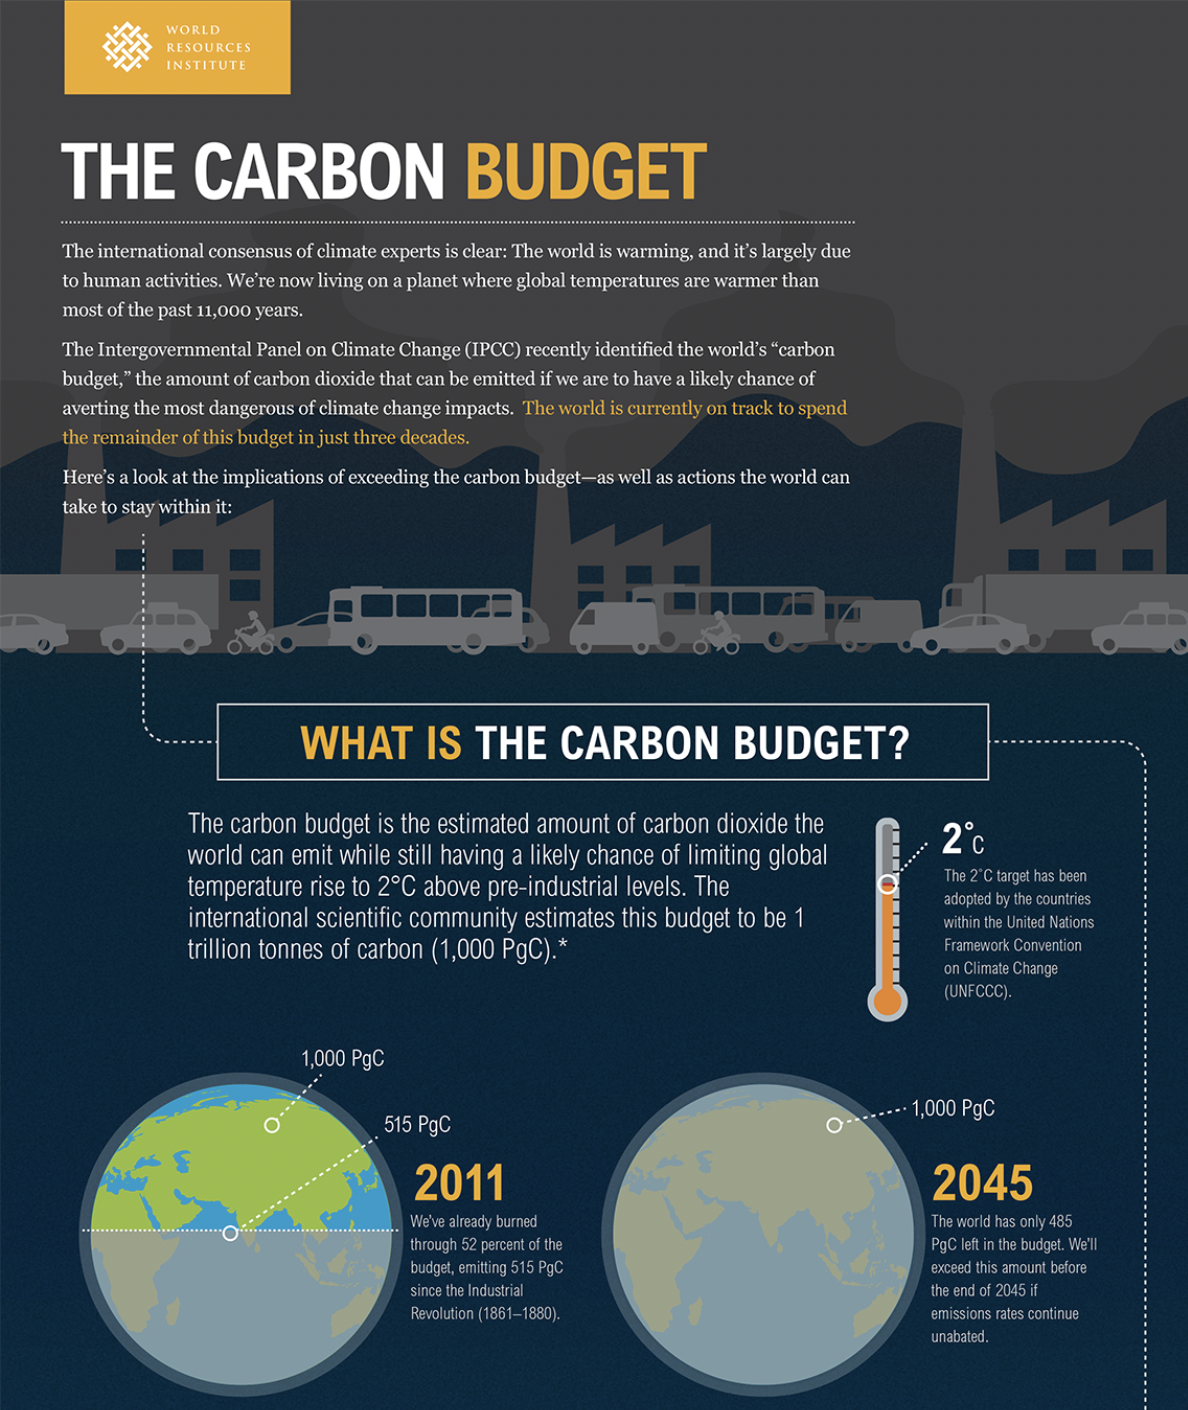 carbon budget infographic example 646217f241735 sej - A Guide To Linkable Assets For Effective Link Building